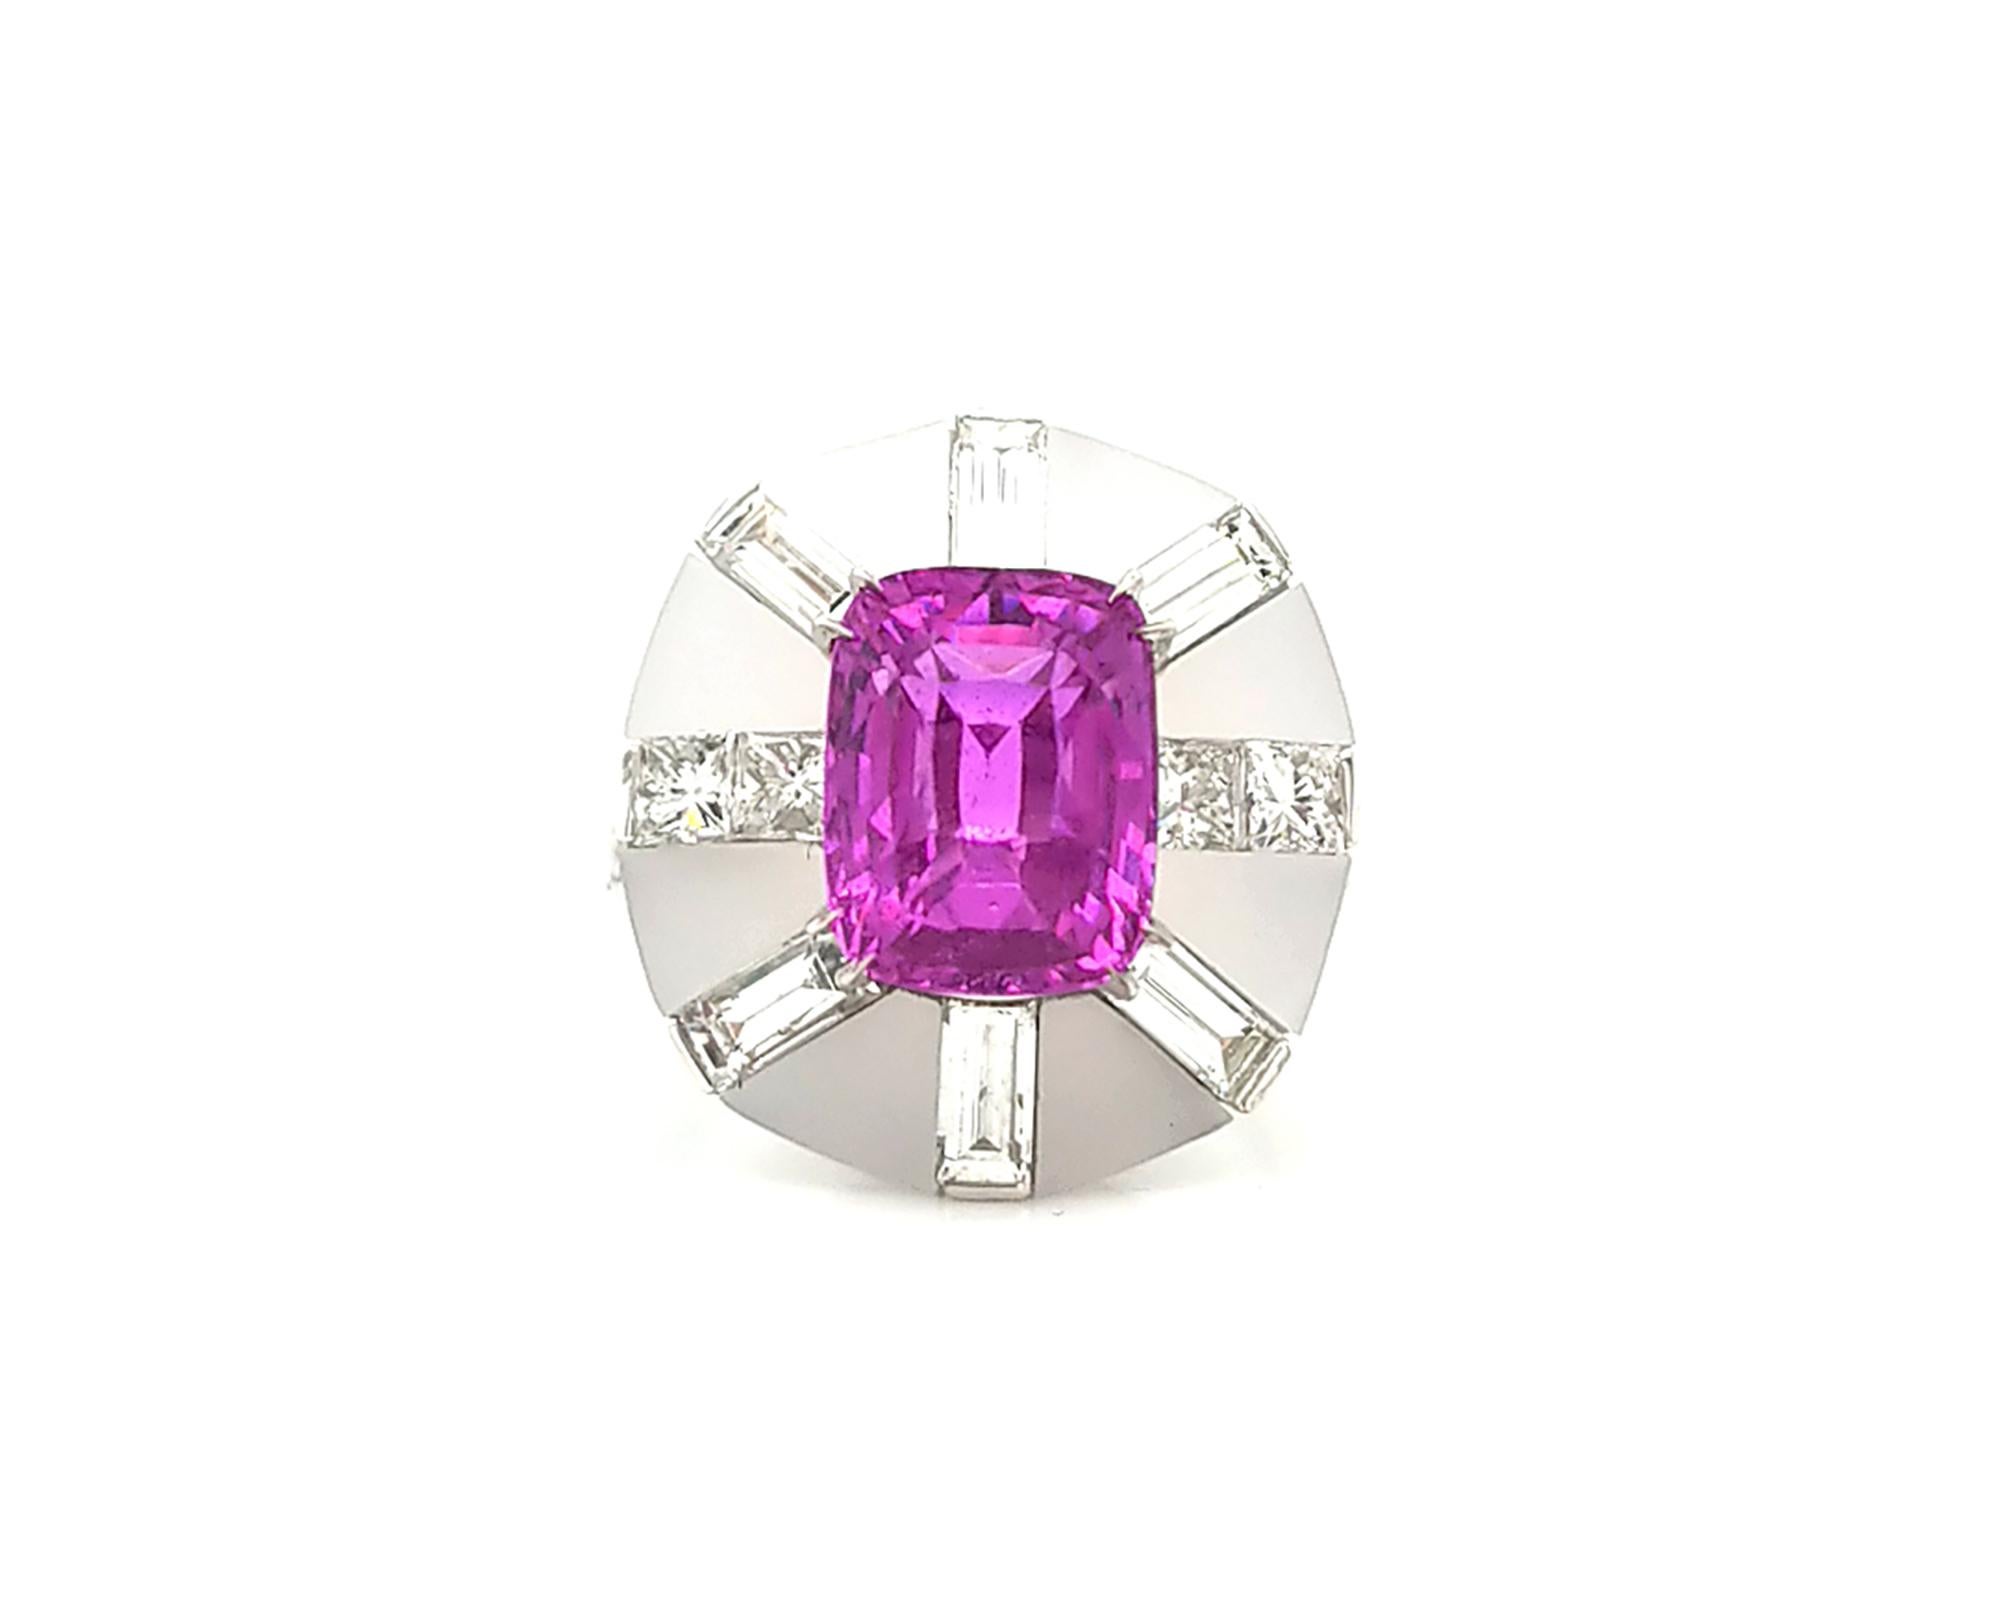 This beautiful cocktail ring is set with a 5.02 carat antique cushion center sapphire on top of a rock crystal.
The sapphire is certified with SSEF stating that is has no indication of heat.
It's also embellished with 6 baguette and 4 princess cut